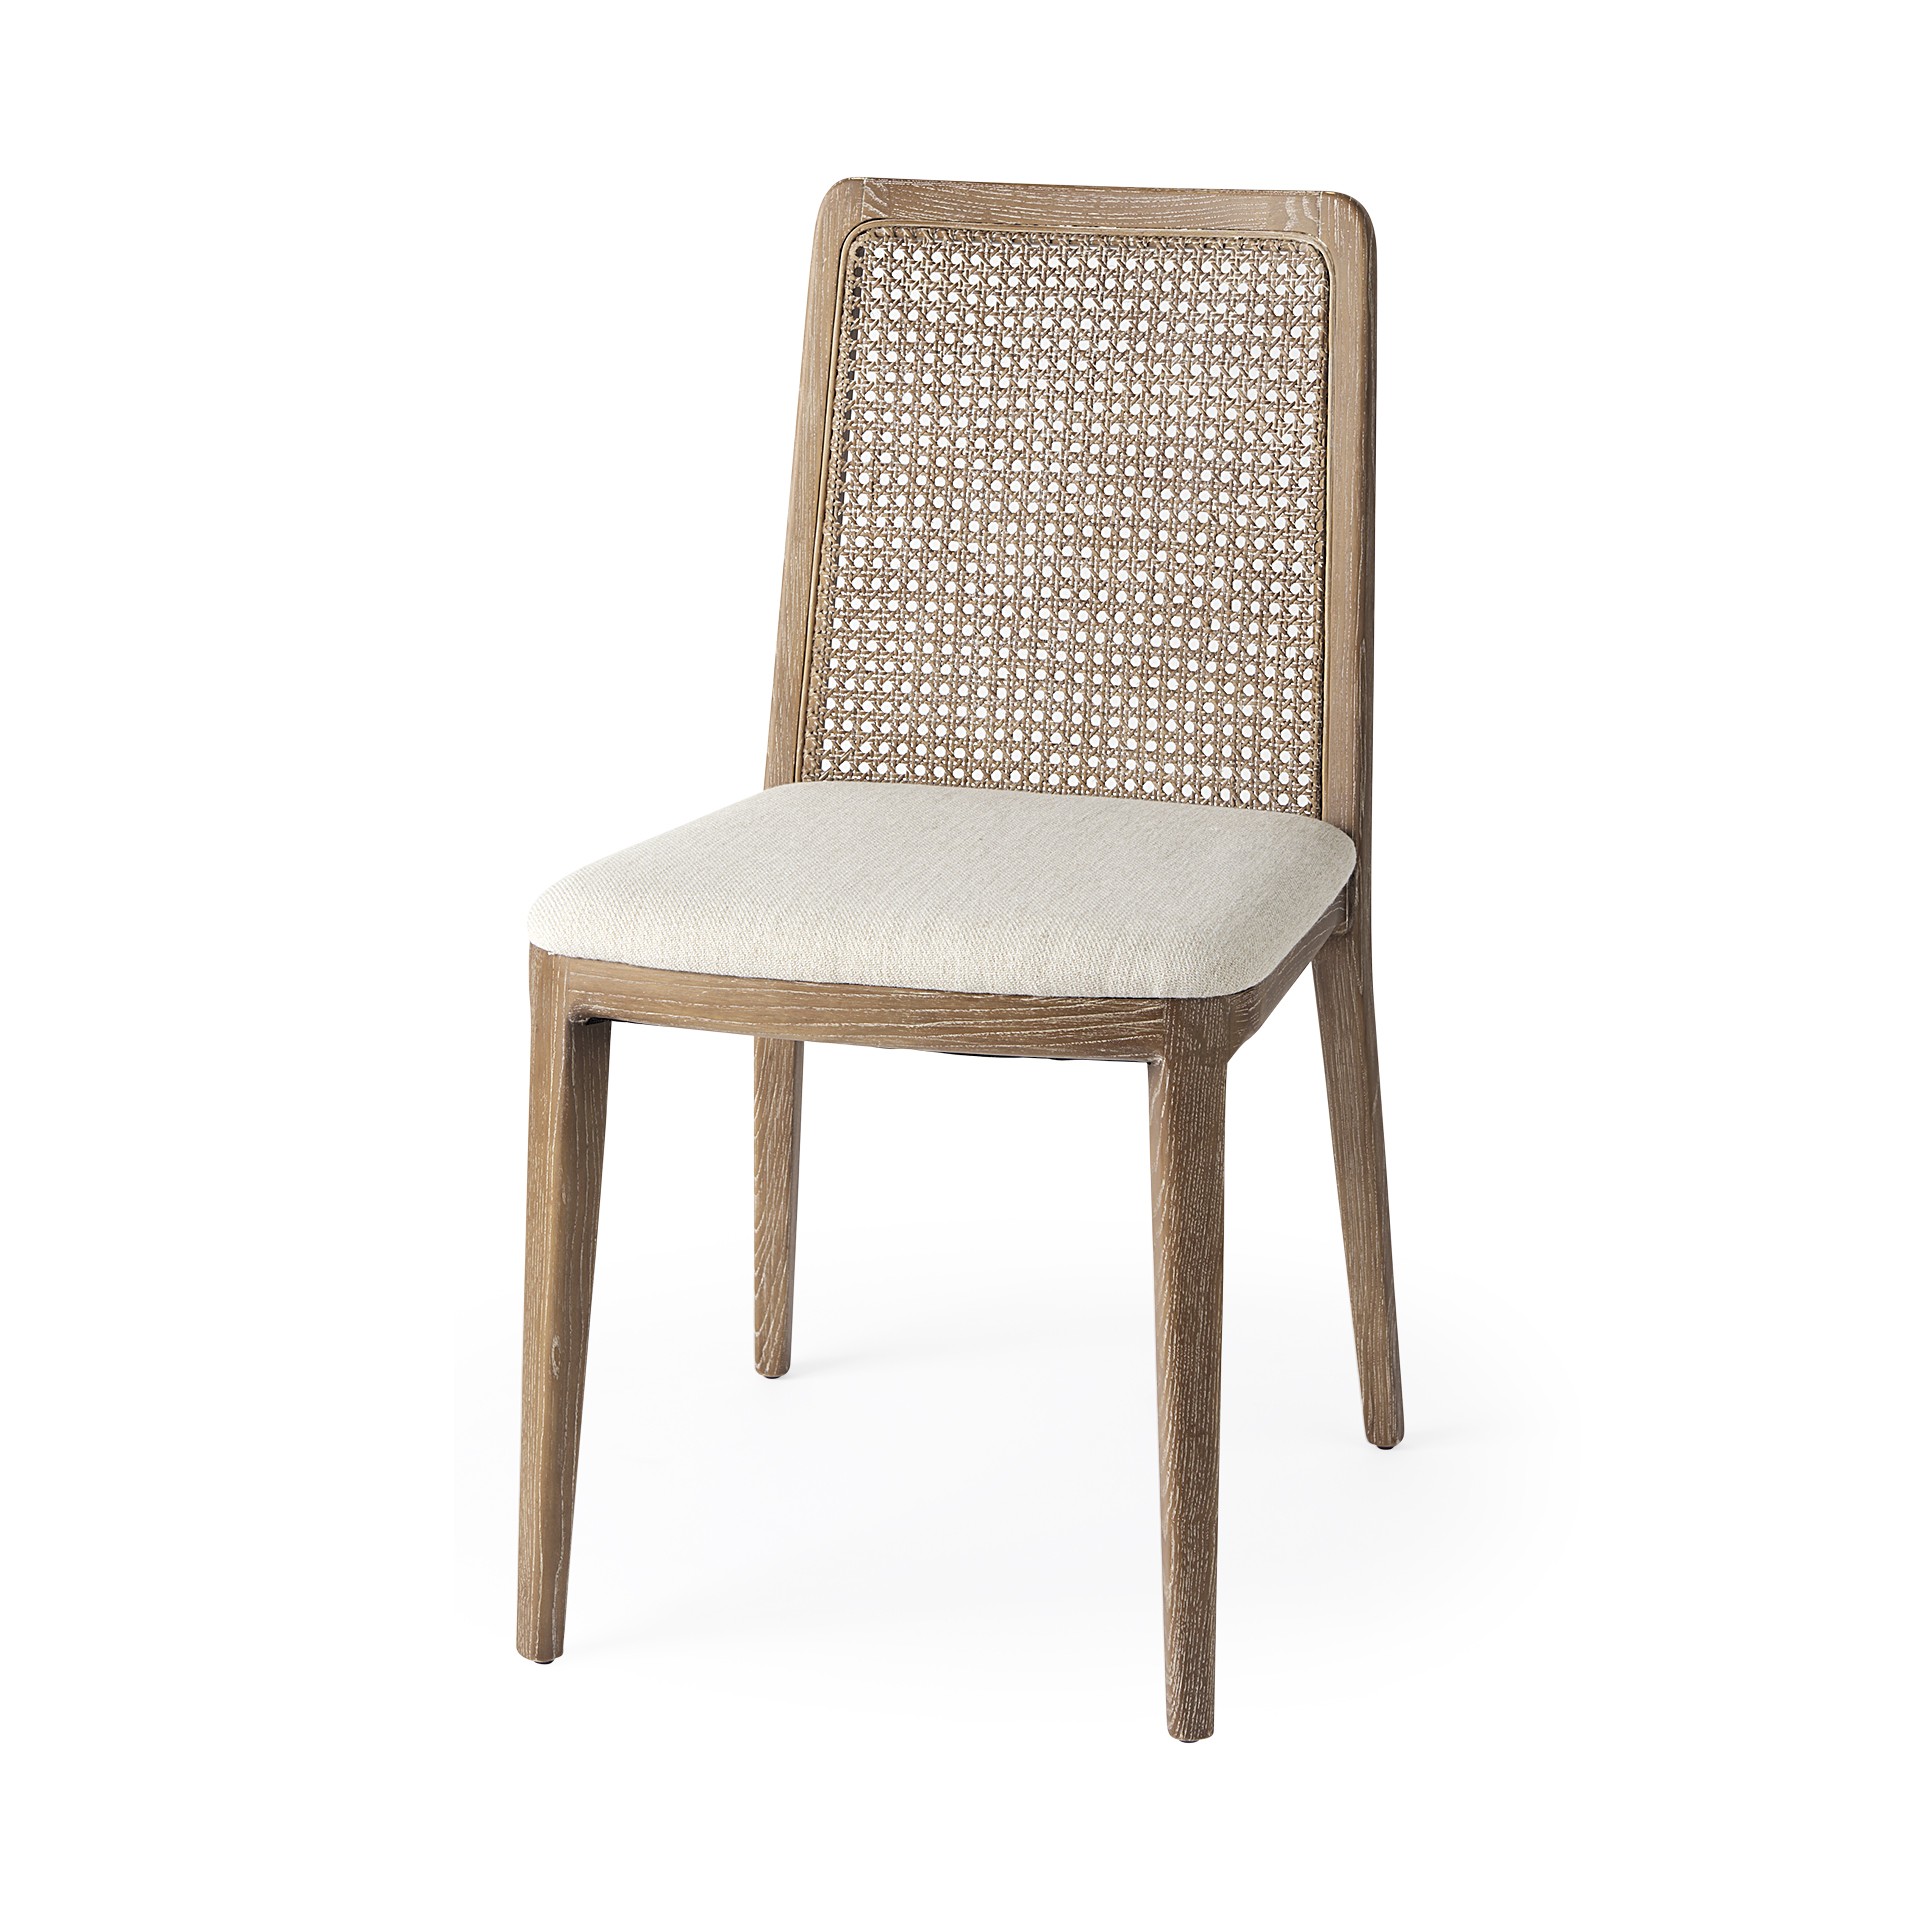 Light Natural and Cream Uholstery and Cane Armless Dining Chair